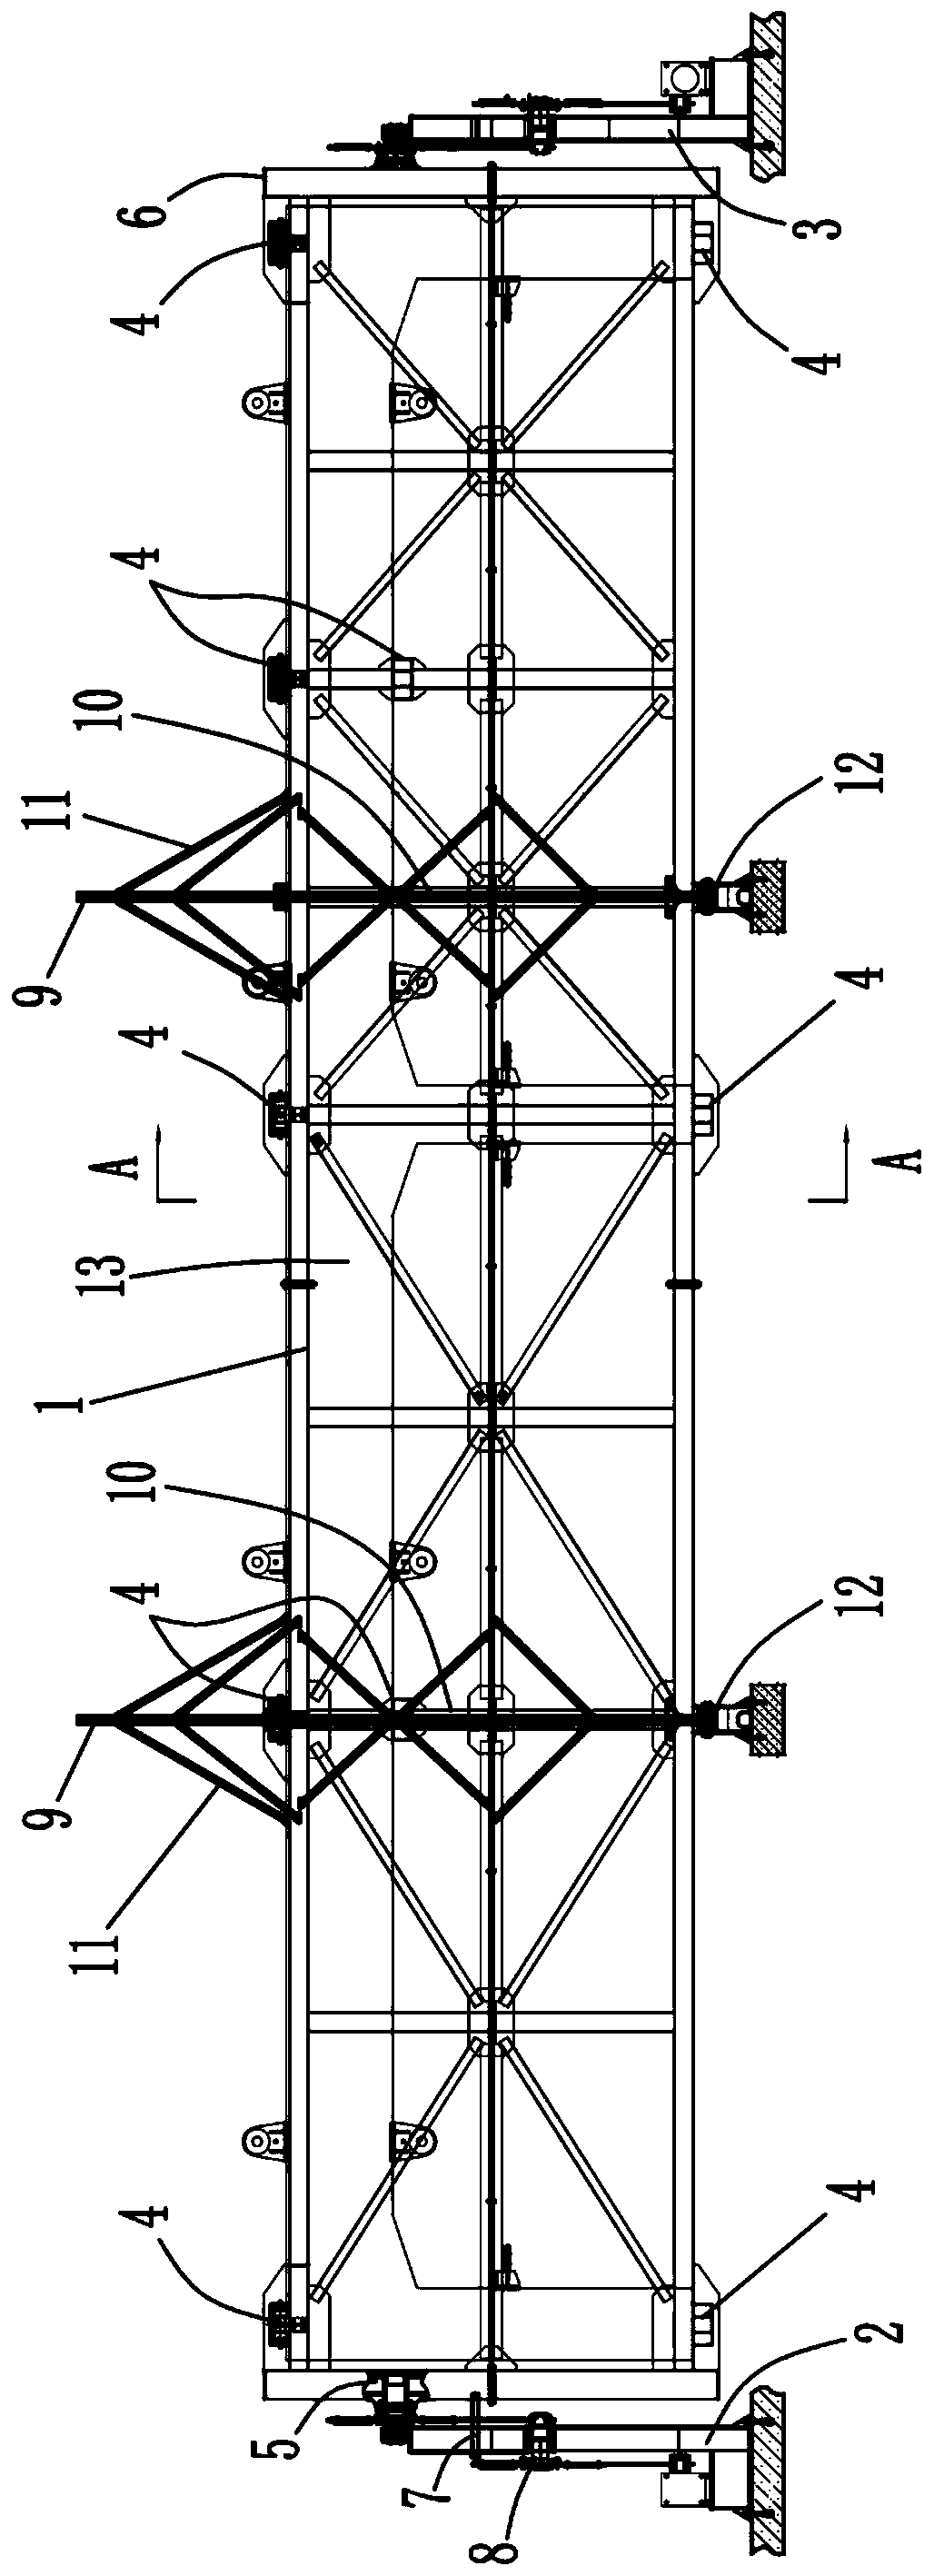 A turning mechanism and turning method suitable for an assembled underpass tunnel